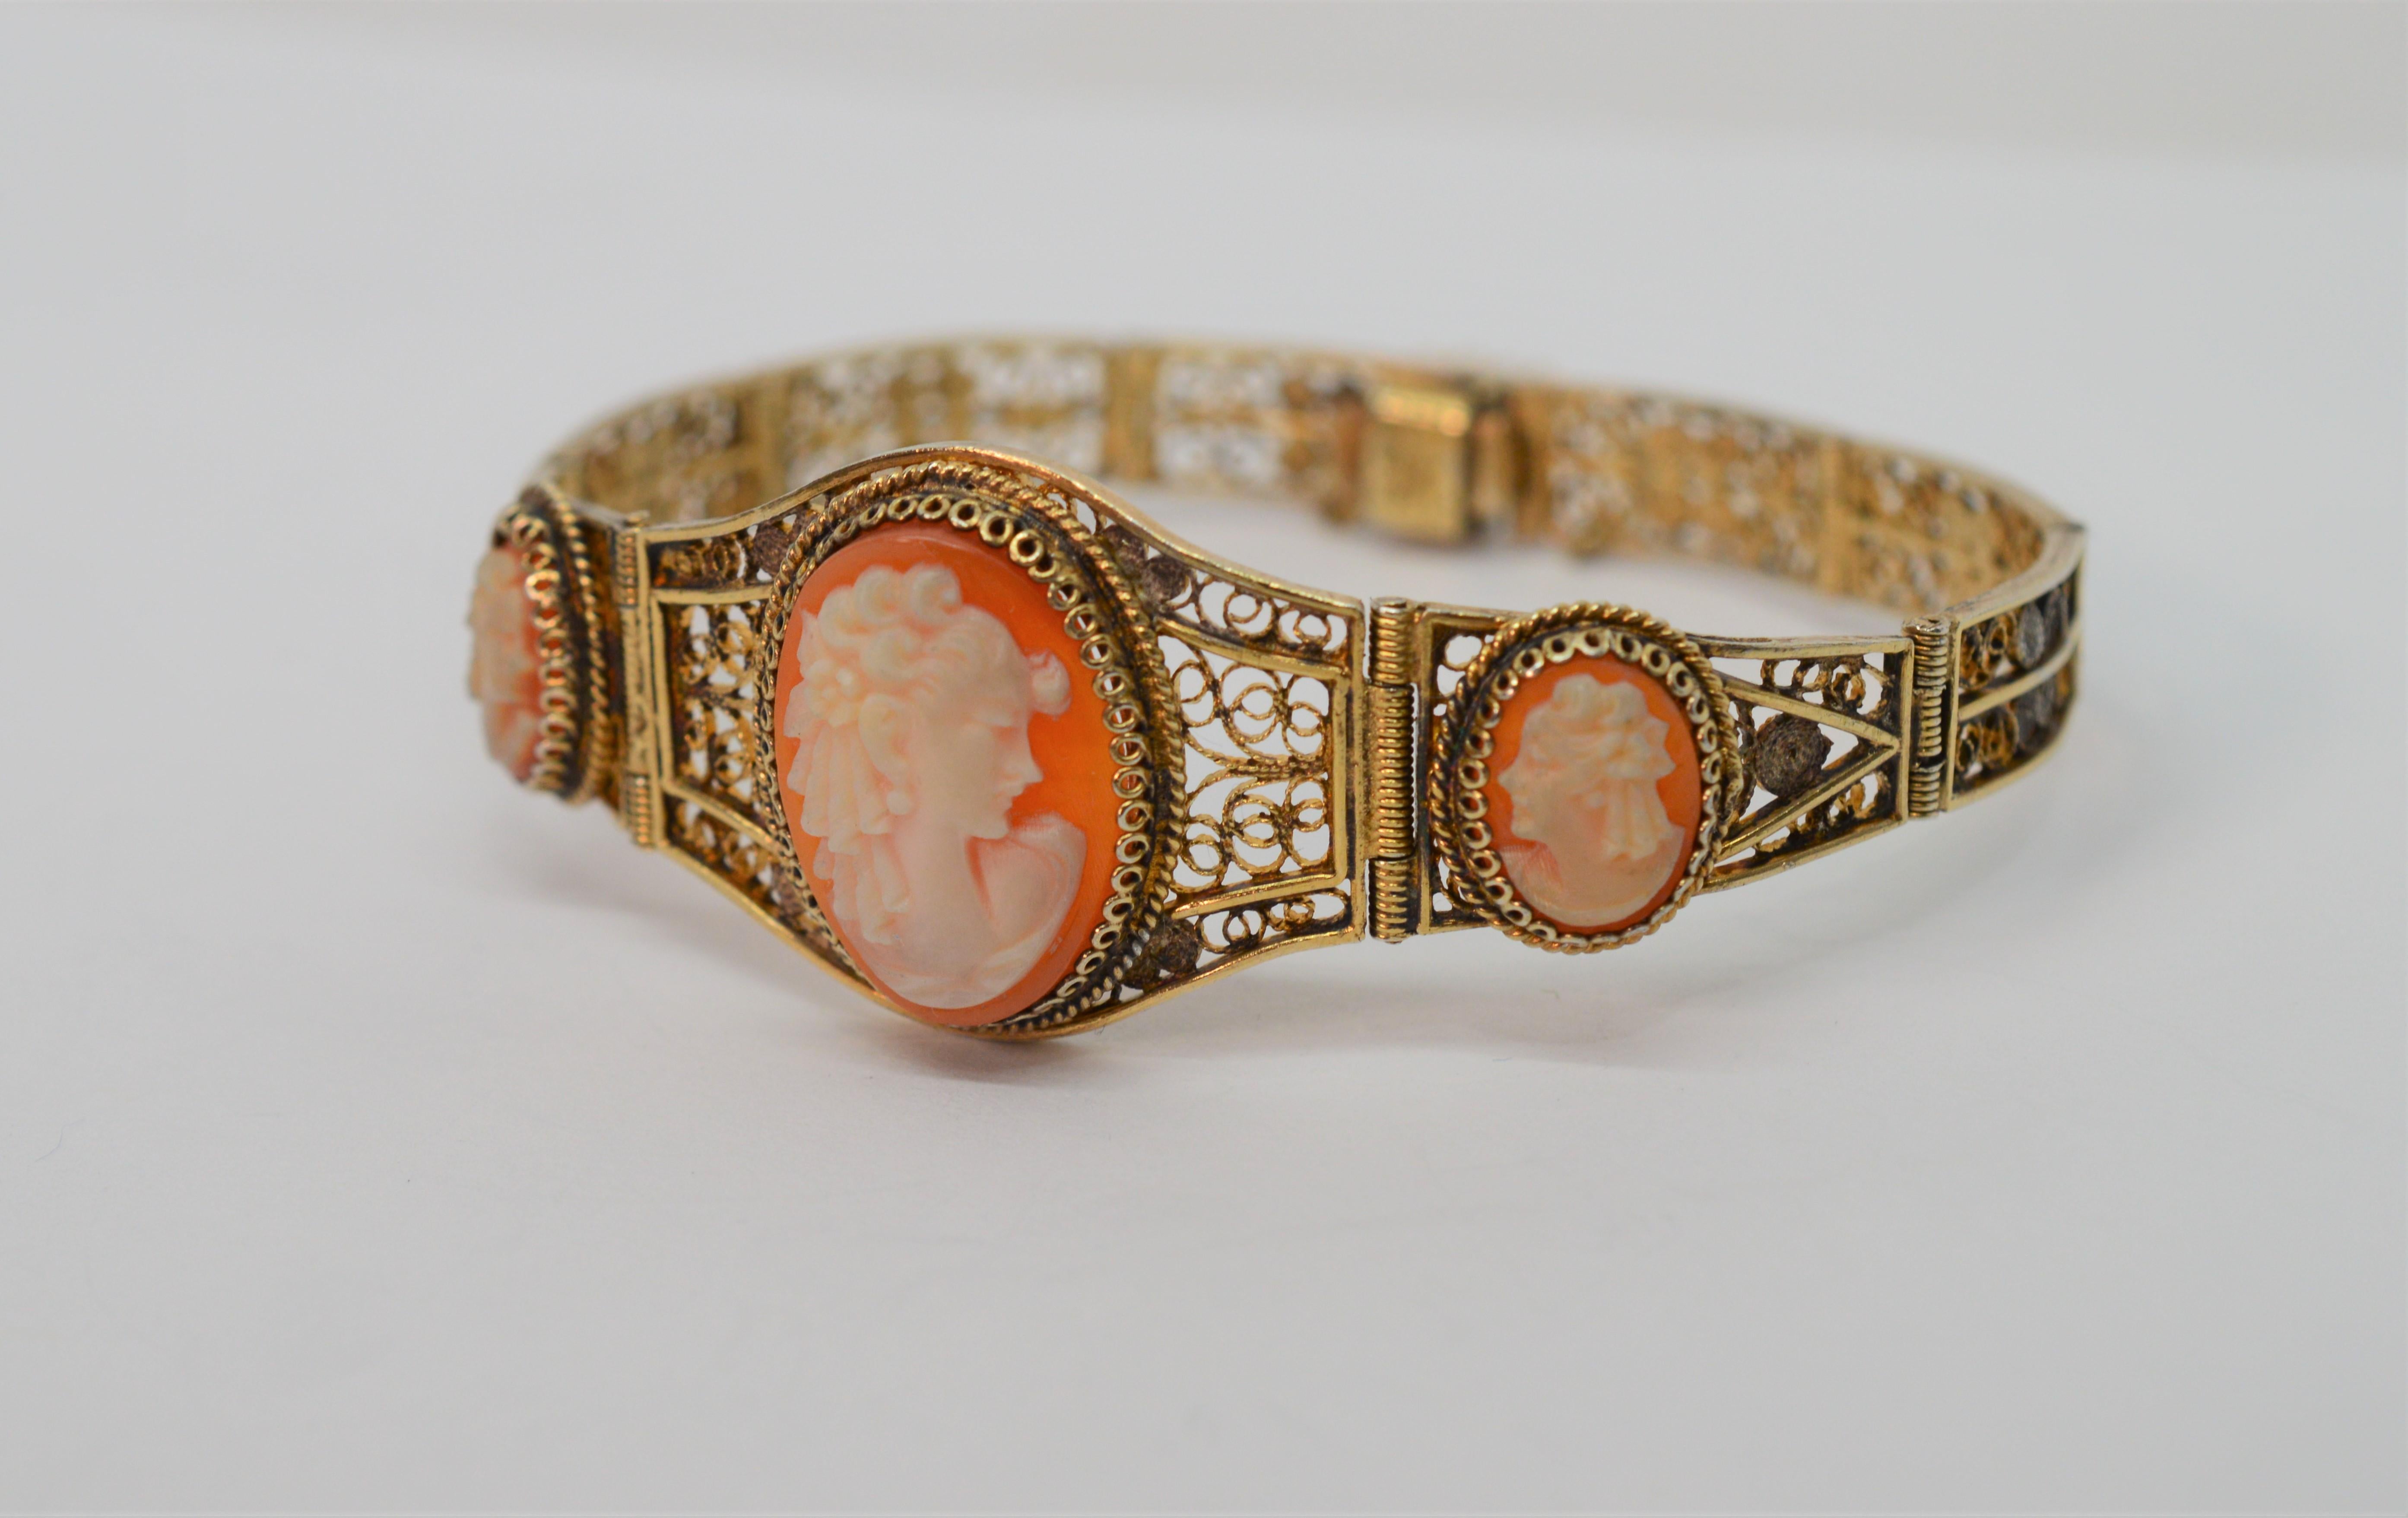 With notable artistry, nine fine filigree links made of gilded silver graduate forward to host three Victorian style carved shell cameos on this unique bracelet. The silhouettes depict a noblewoman with her ladies in waiting are featured with an